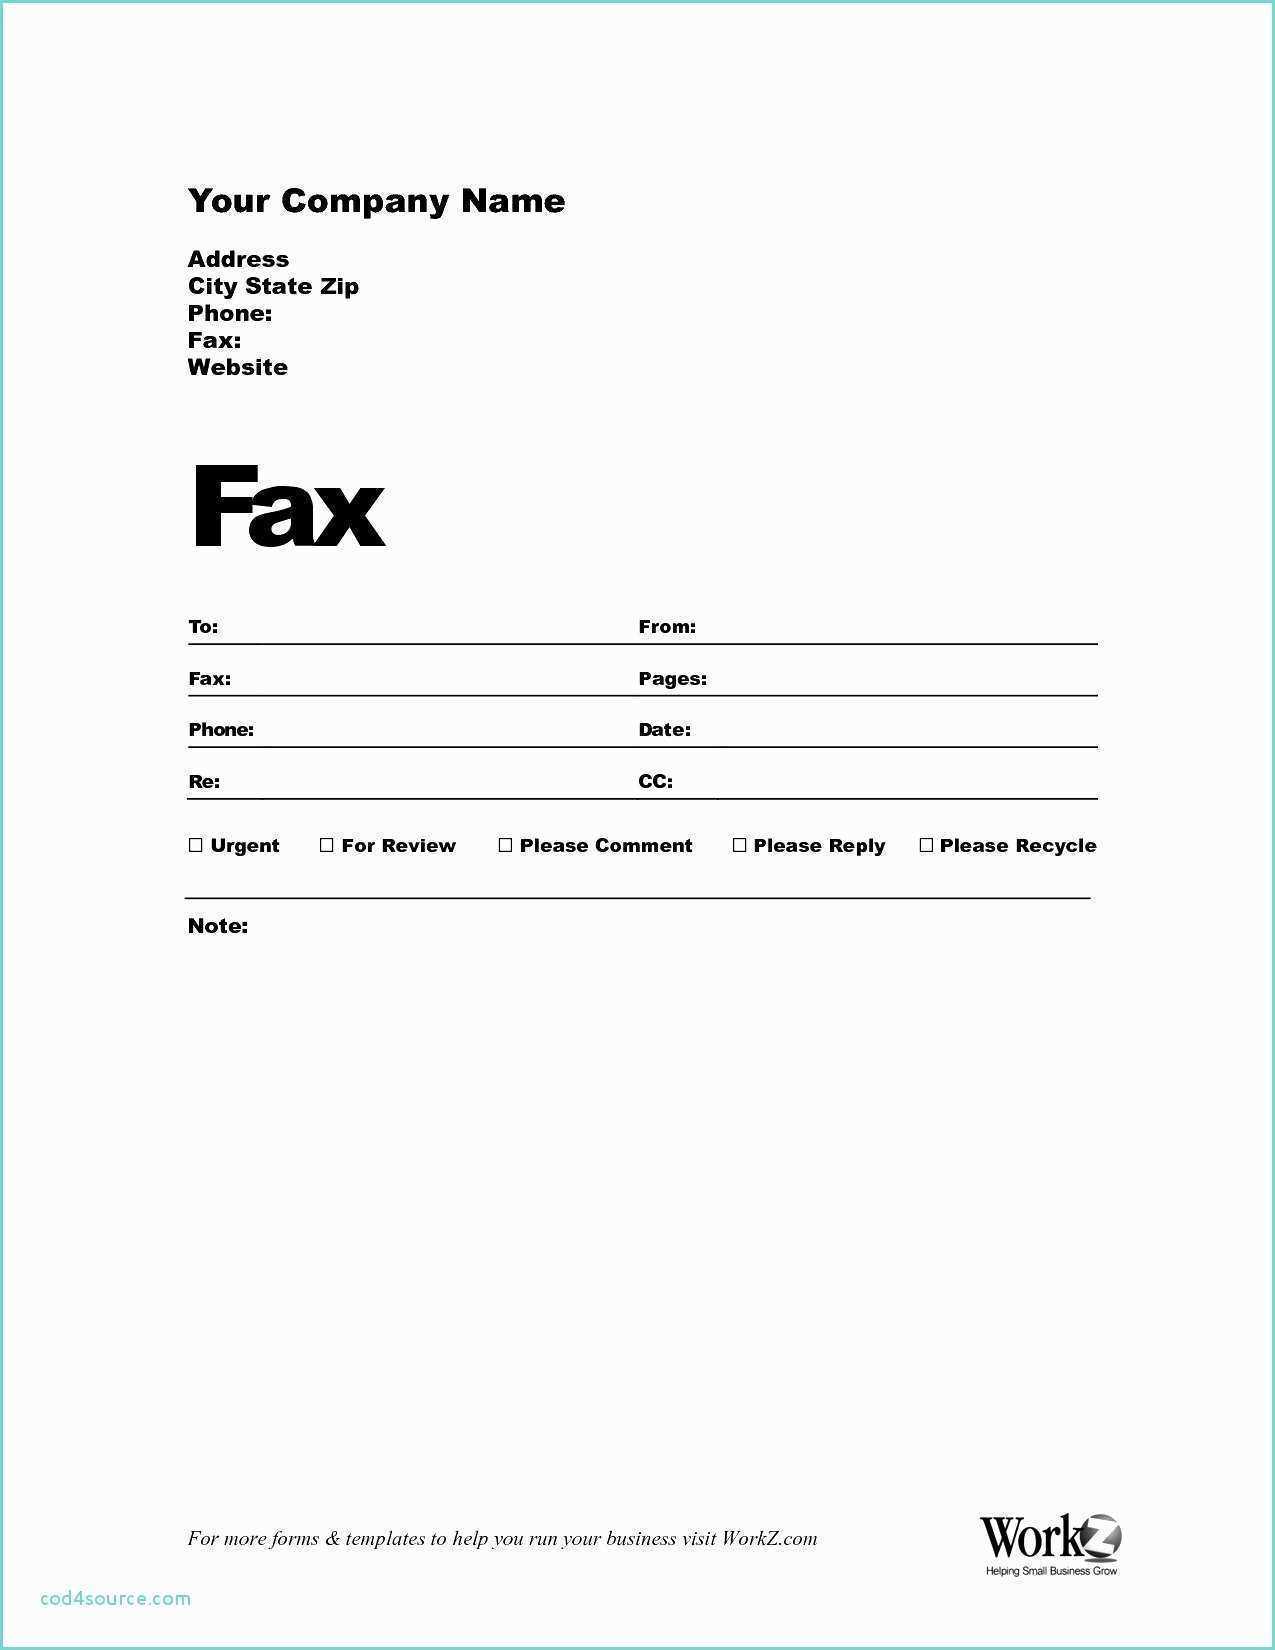 Index Card Template Free Recipe 3X5 For Mac 4X6 Pages Blank With 5 By 8 Index Card Template